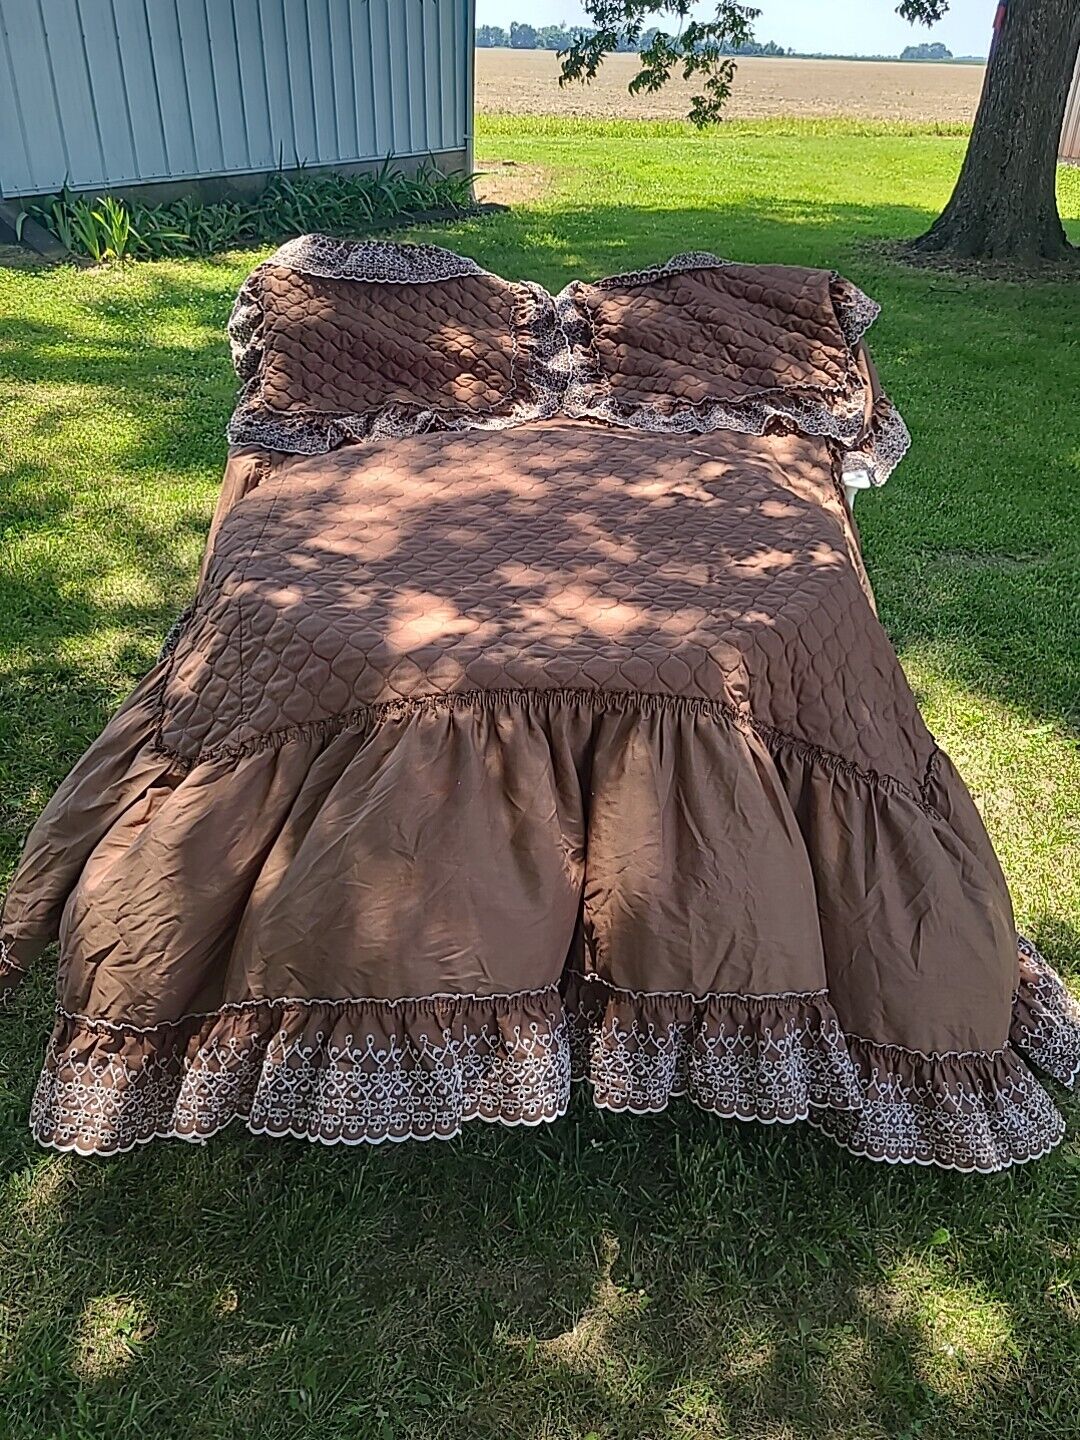 Vintage SEARS Quilted Bedspread & 2 Shams 1970s Brown Ruffled Eyelet Cottagecore